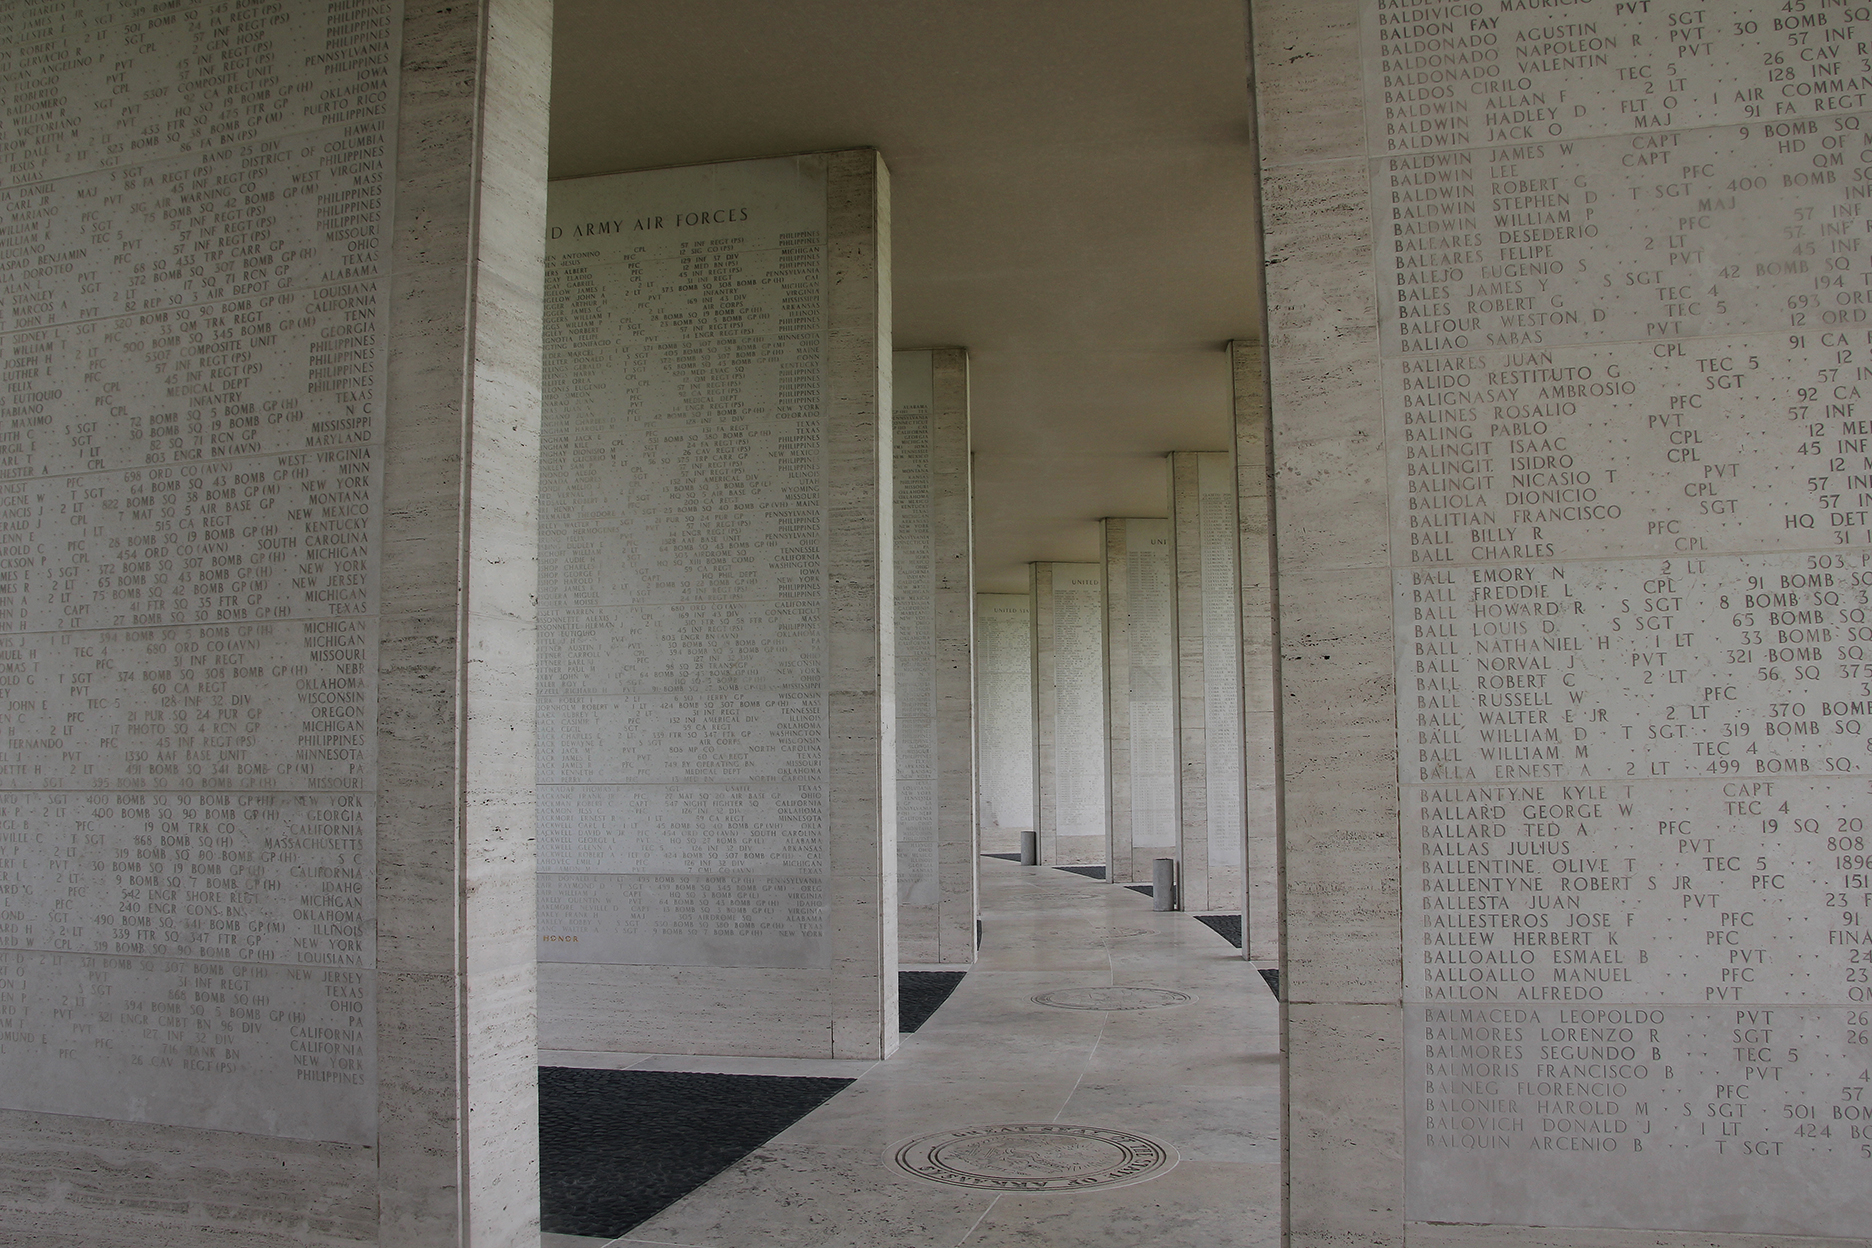 Inscribed on the columns are tablets of the names of the 36,285 missing.